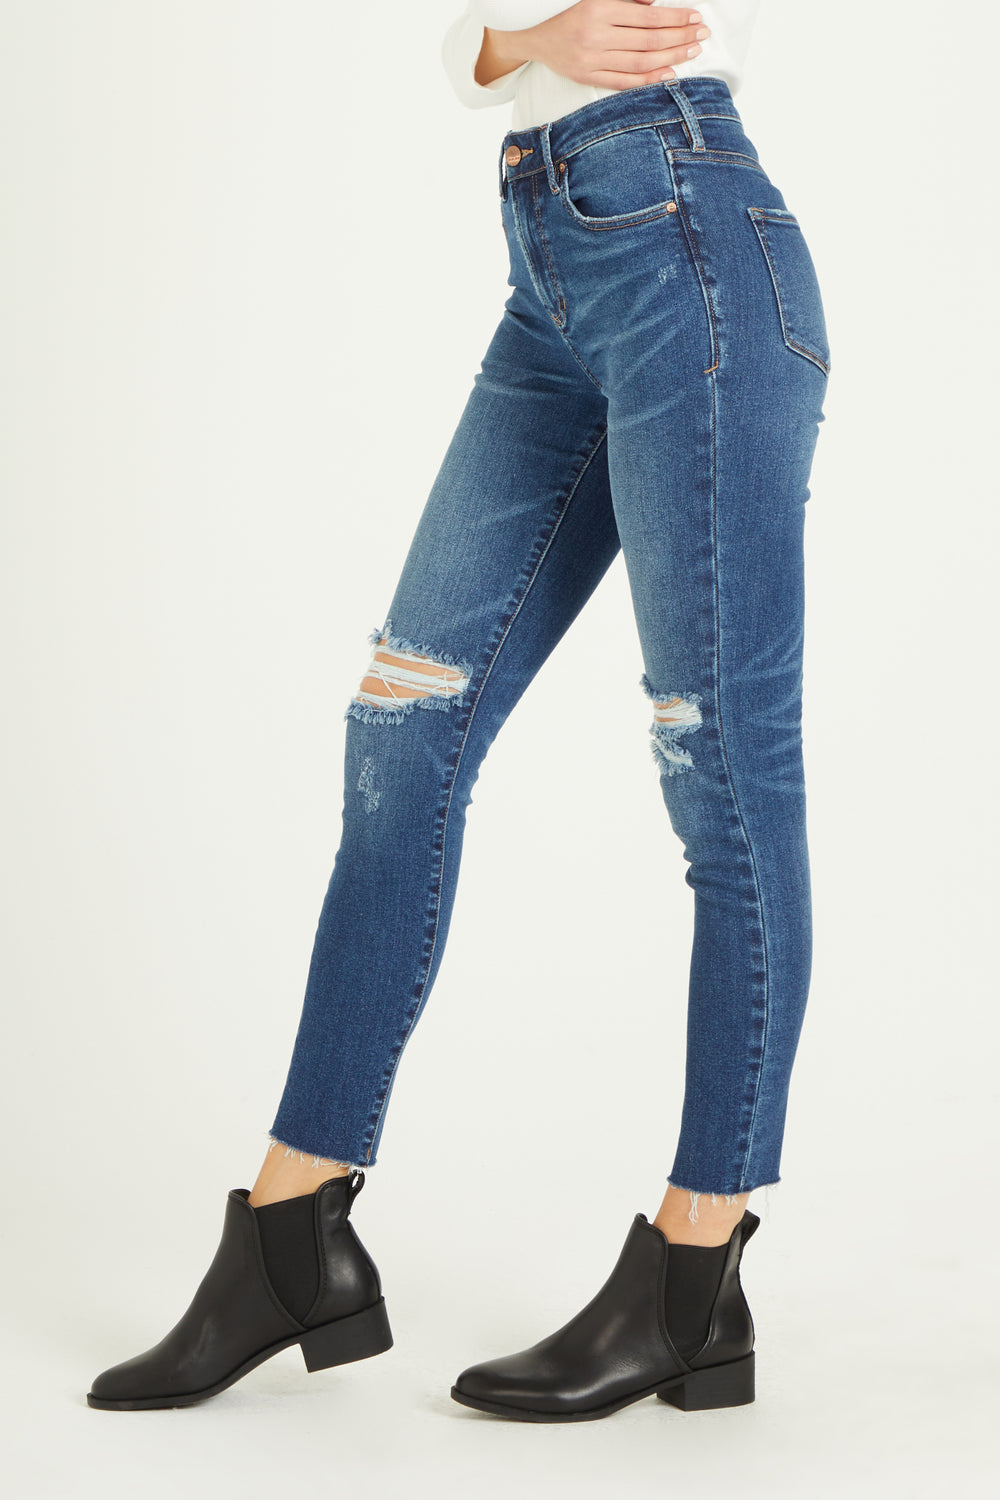 image of a female model wearing a 10 1/2" SUPER HIGH RISE OLIVIA SKINNY VALENCIA JEANS